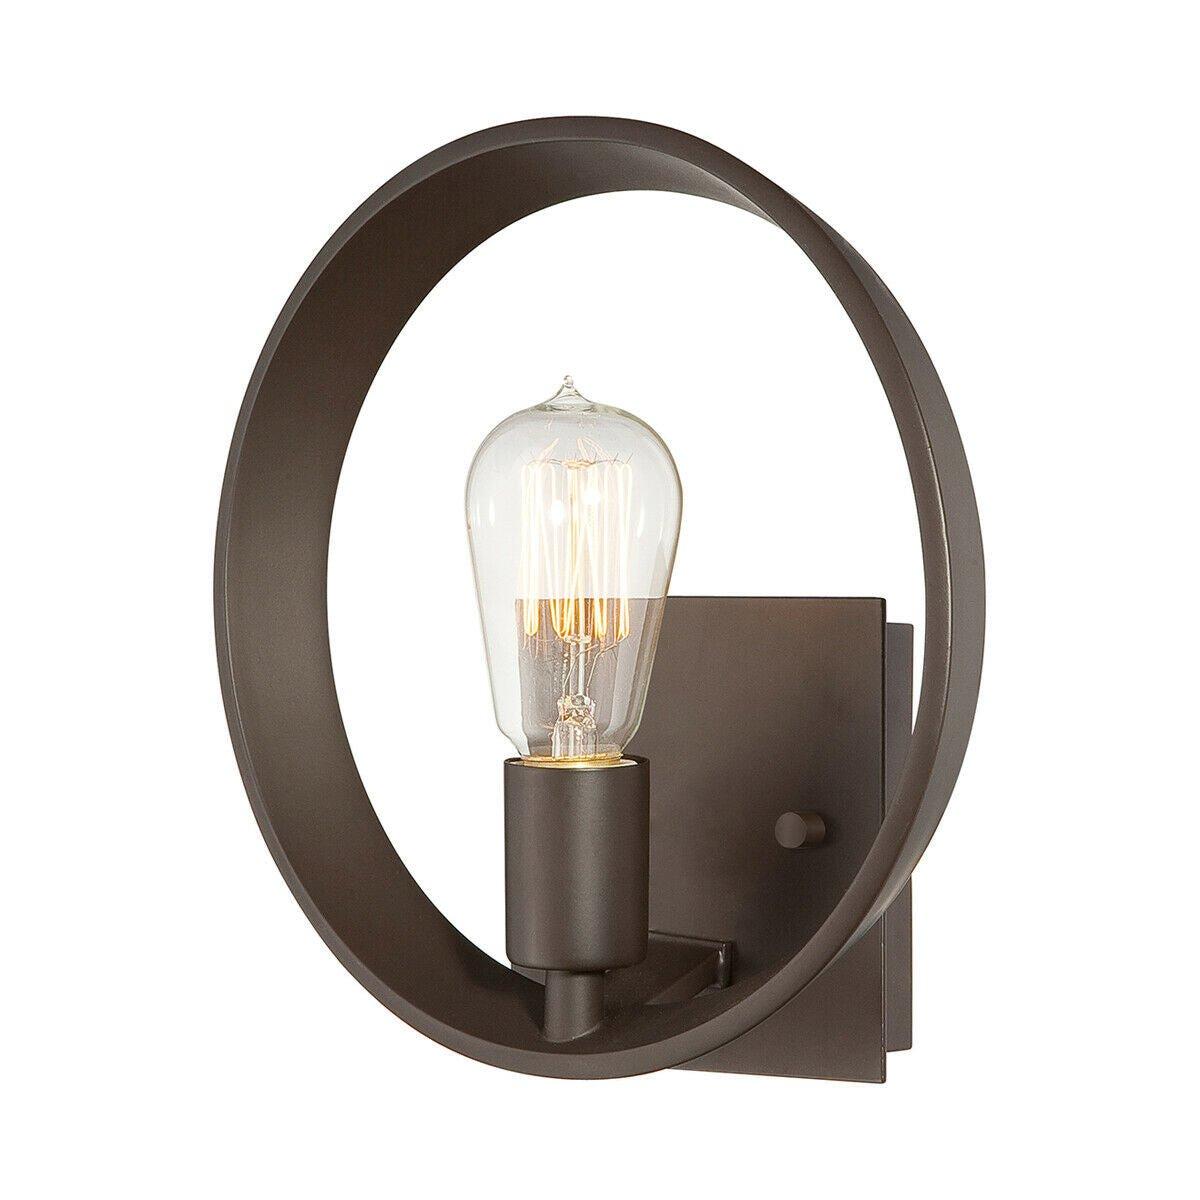 Wall Light Upended Circlular Frame Expose Centre Bulb Western Bronze LED E27 60W